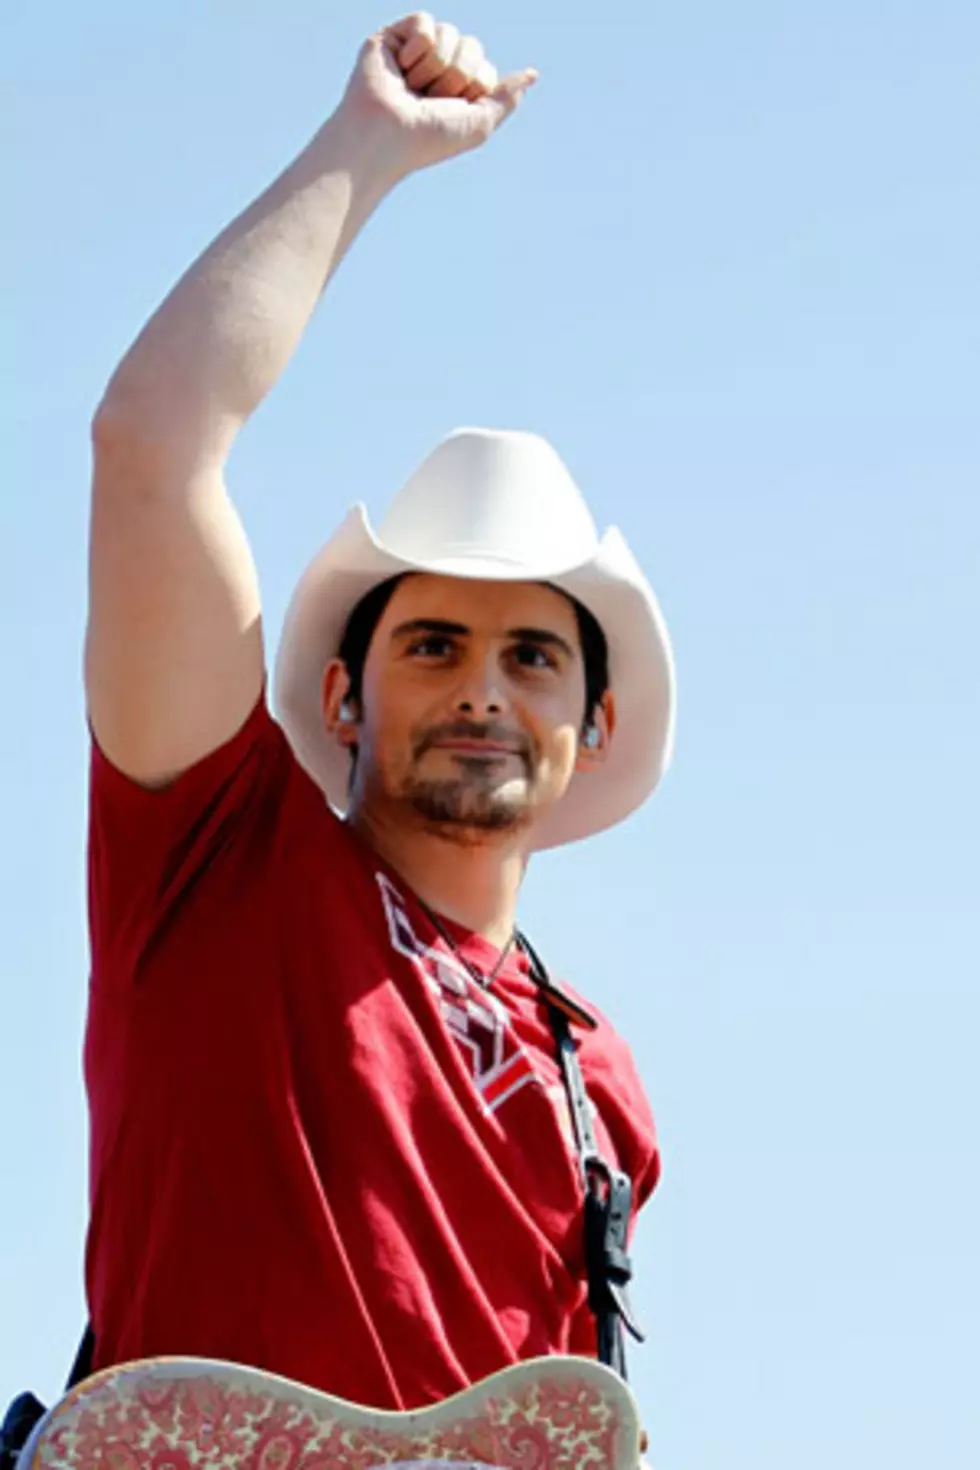 Brad Paisley, ACM Entertainer of the Year Nominee, Gives Out Free Song